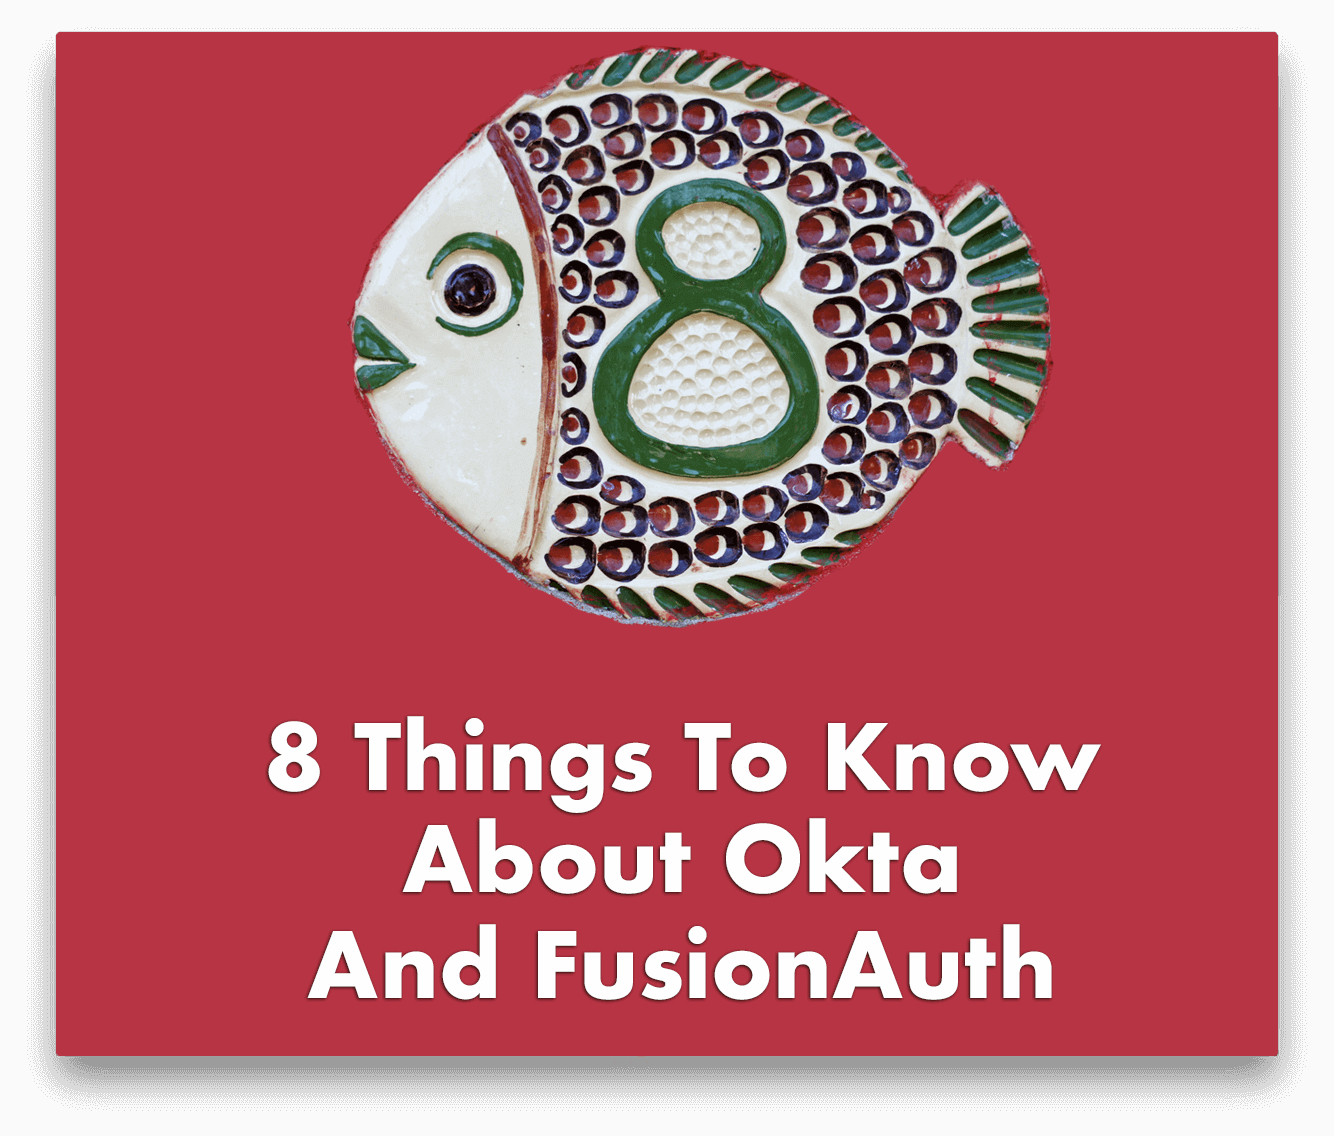 8 Things to Know About Okta And FusionAuth